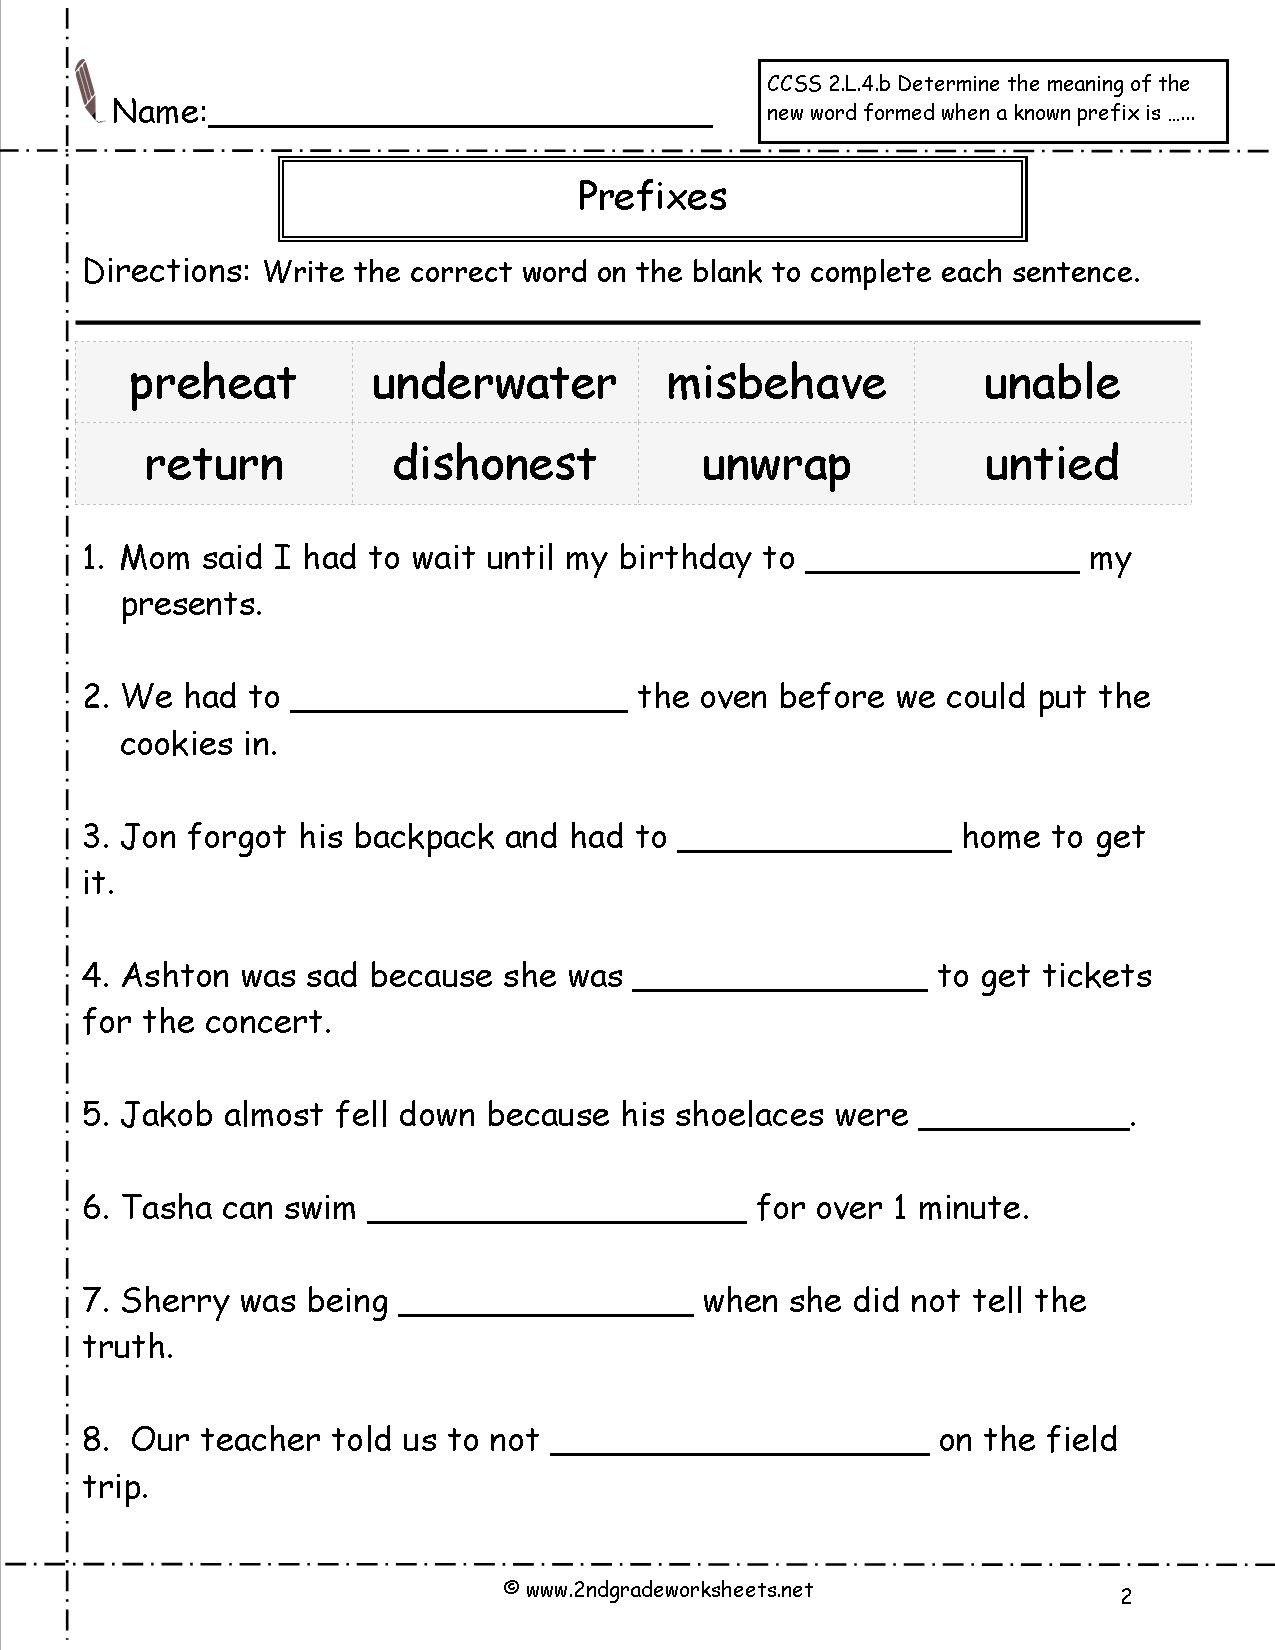 Suffixes Worksheets for 2nd Grade Second Grade Prefixes Worksheets